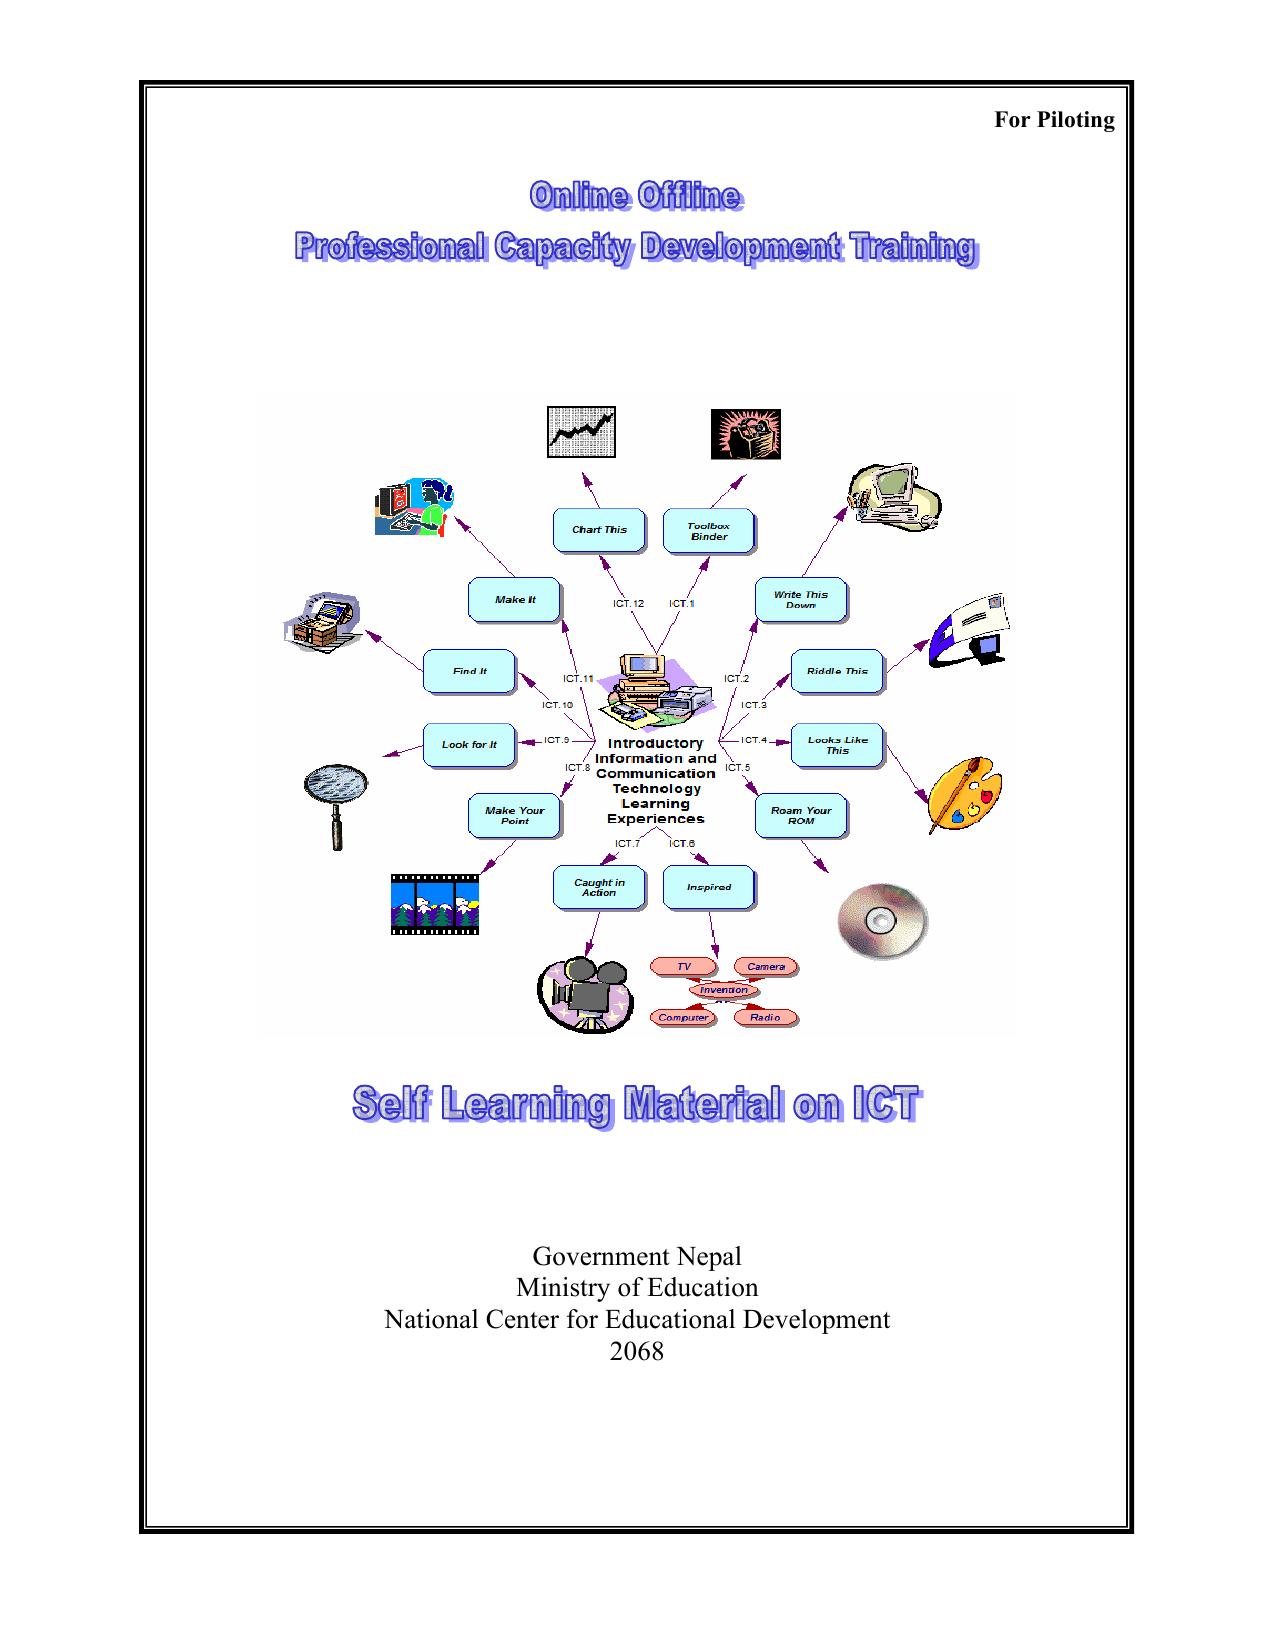 Self Learning Material On ICT